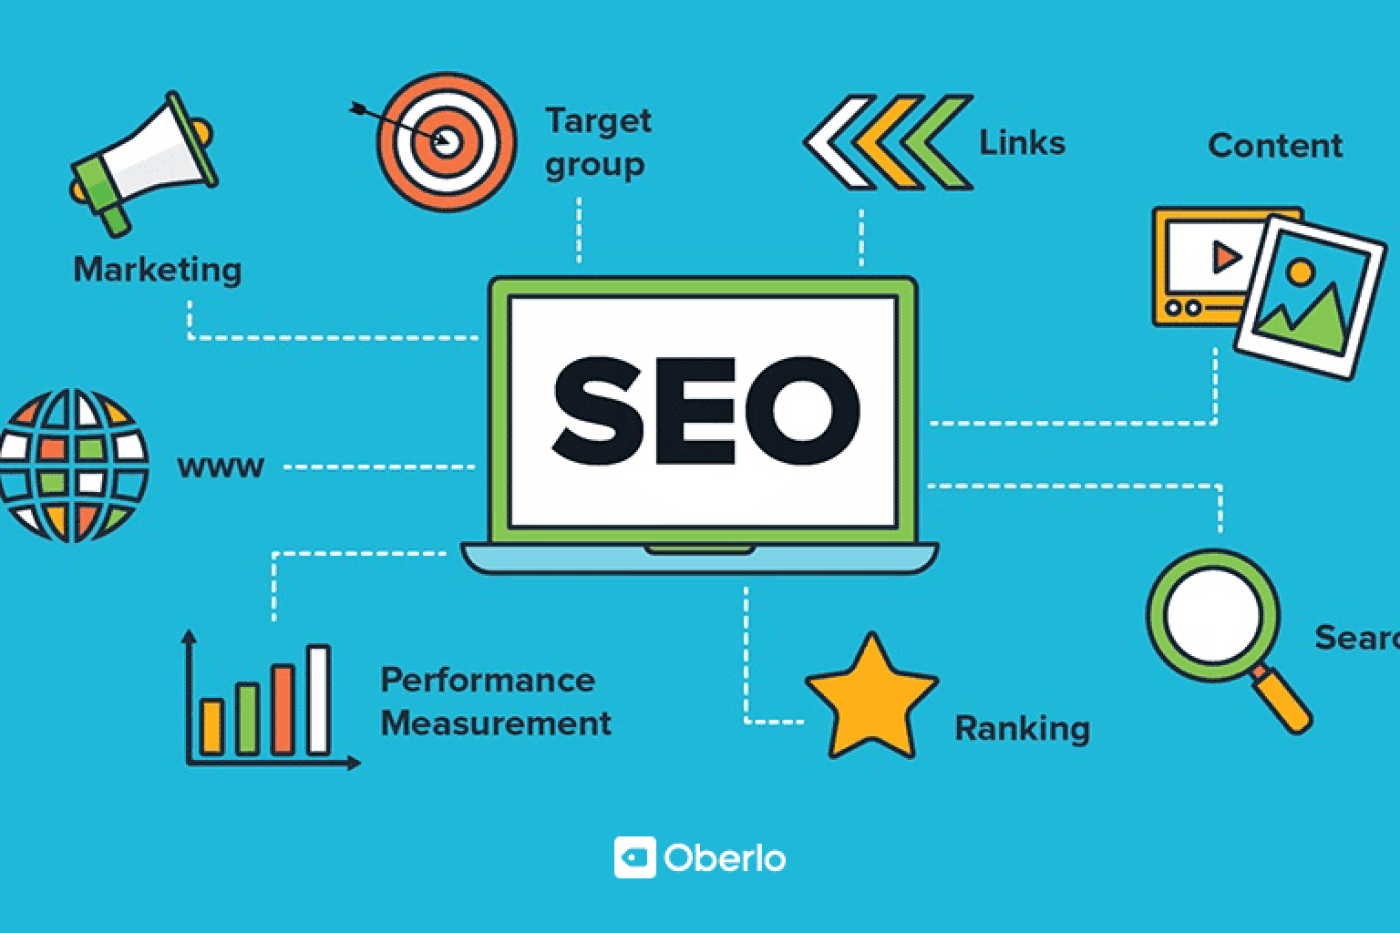 SEO automation: what surrounds SEO